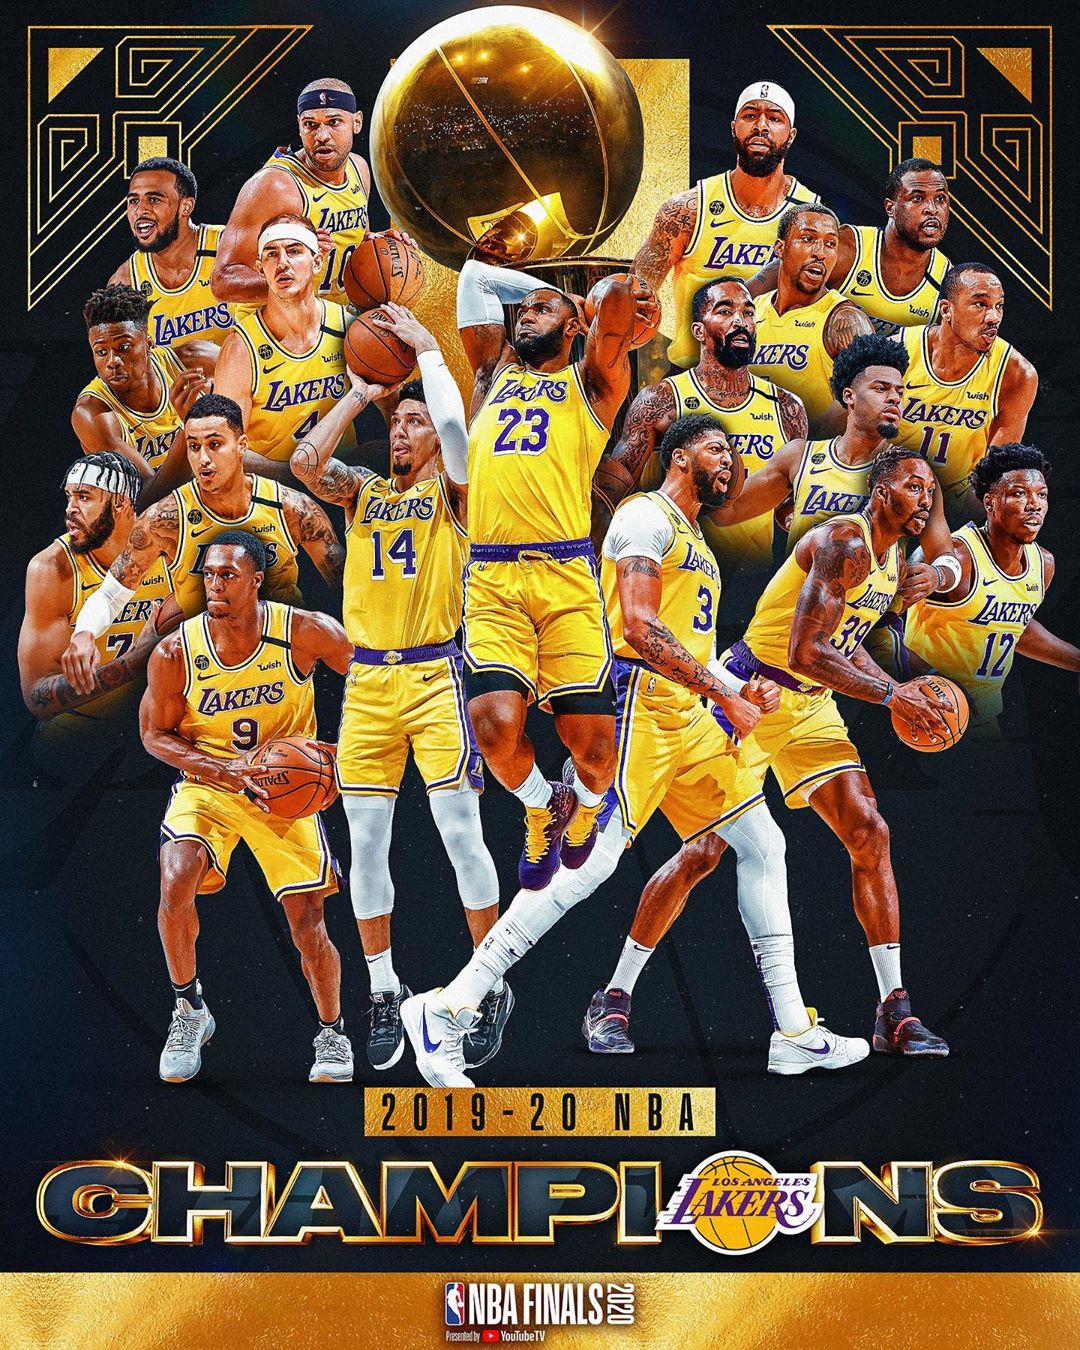 Basketball Team Posters - Official NBA Photo Store